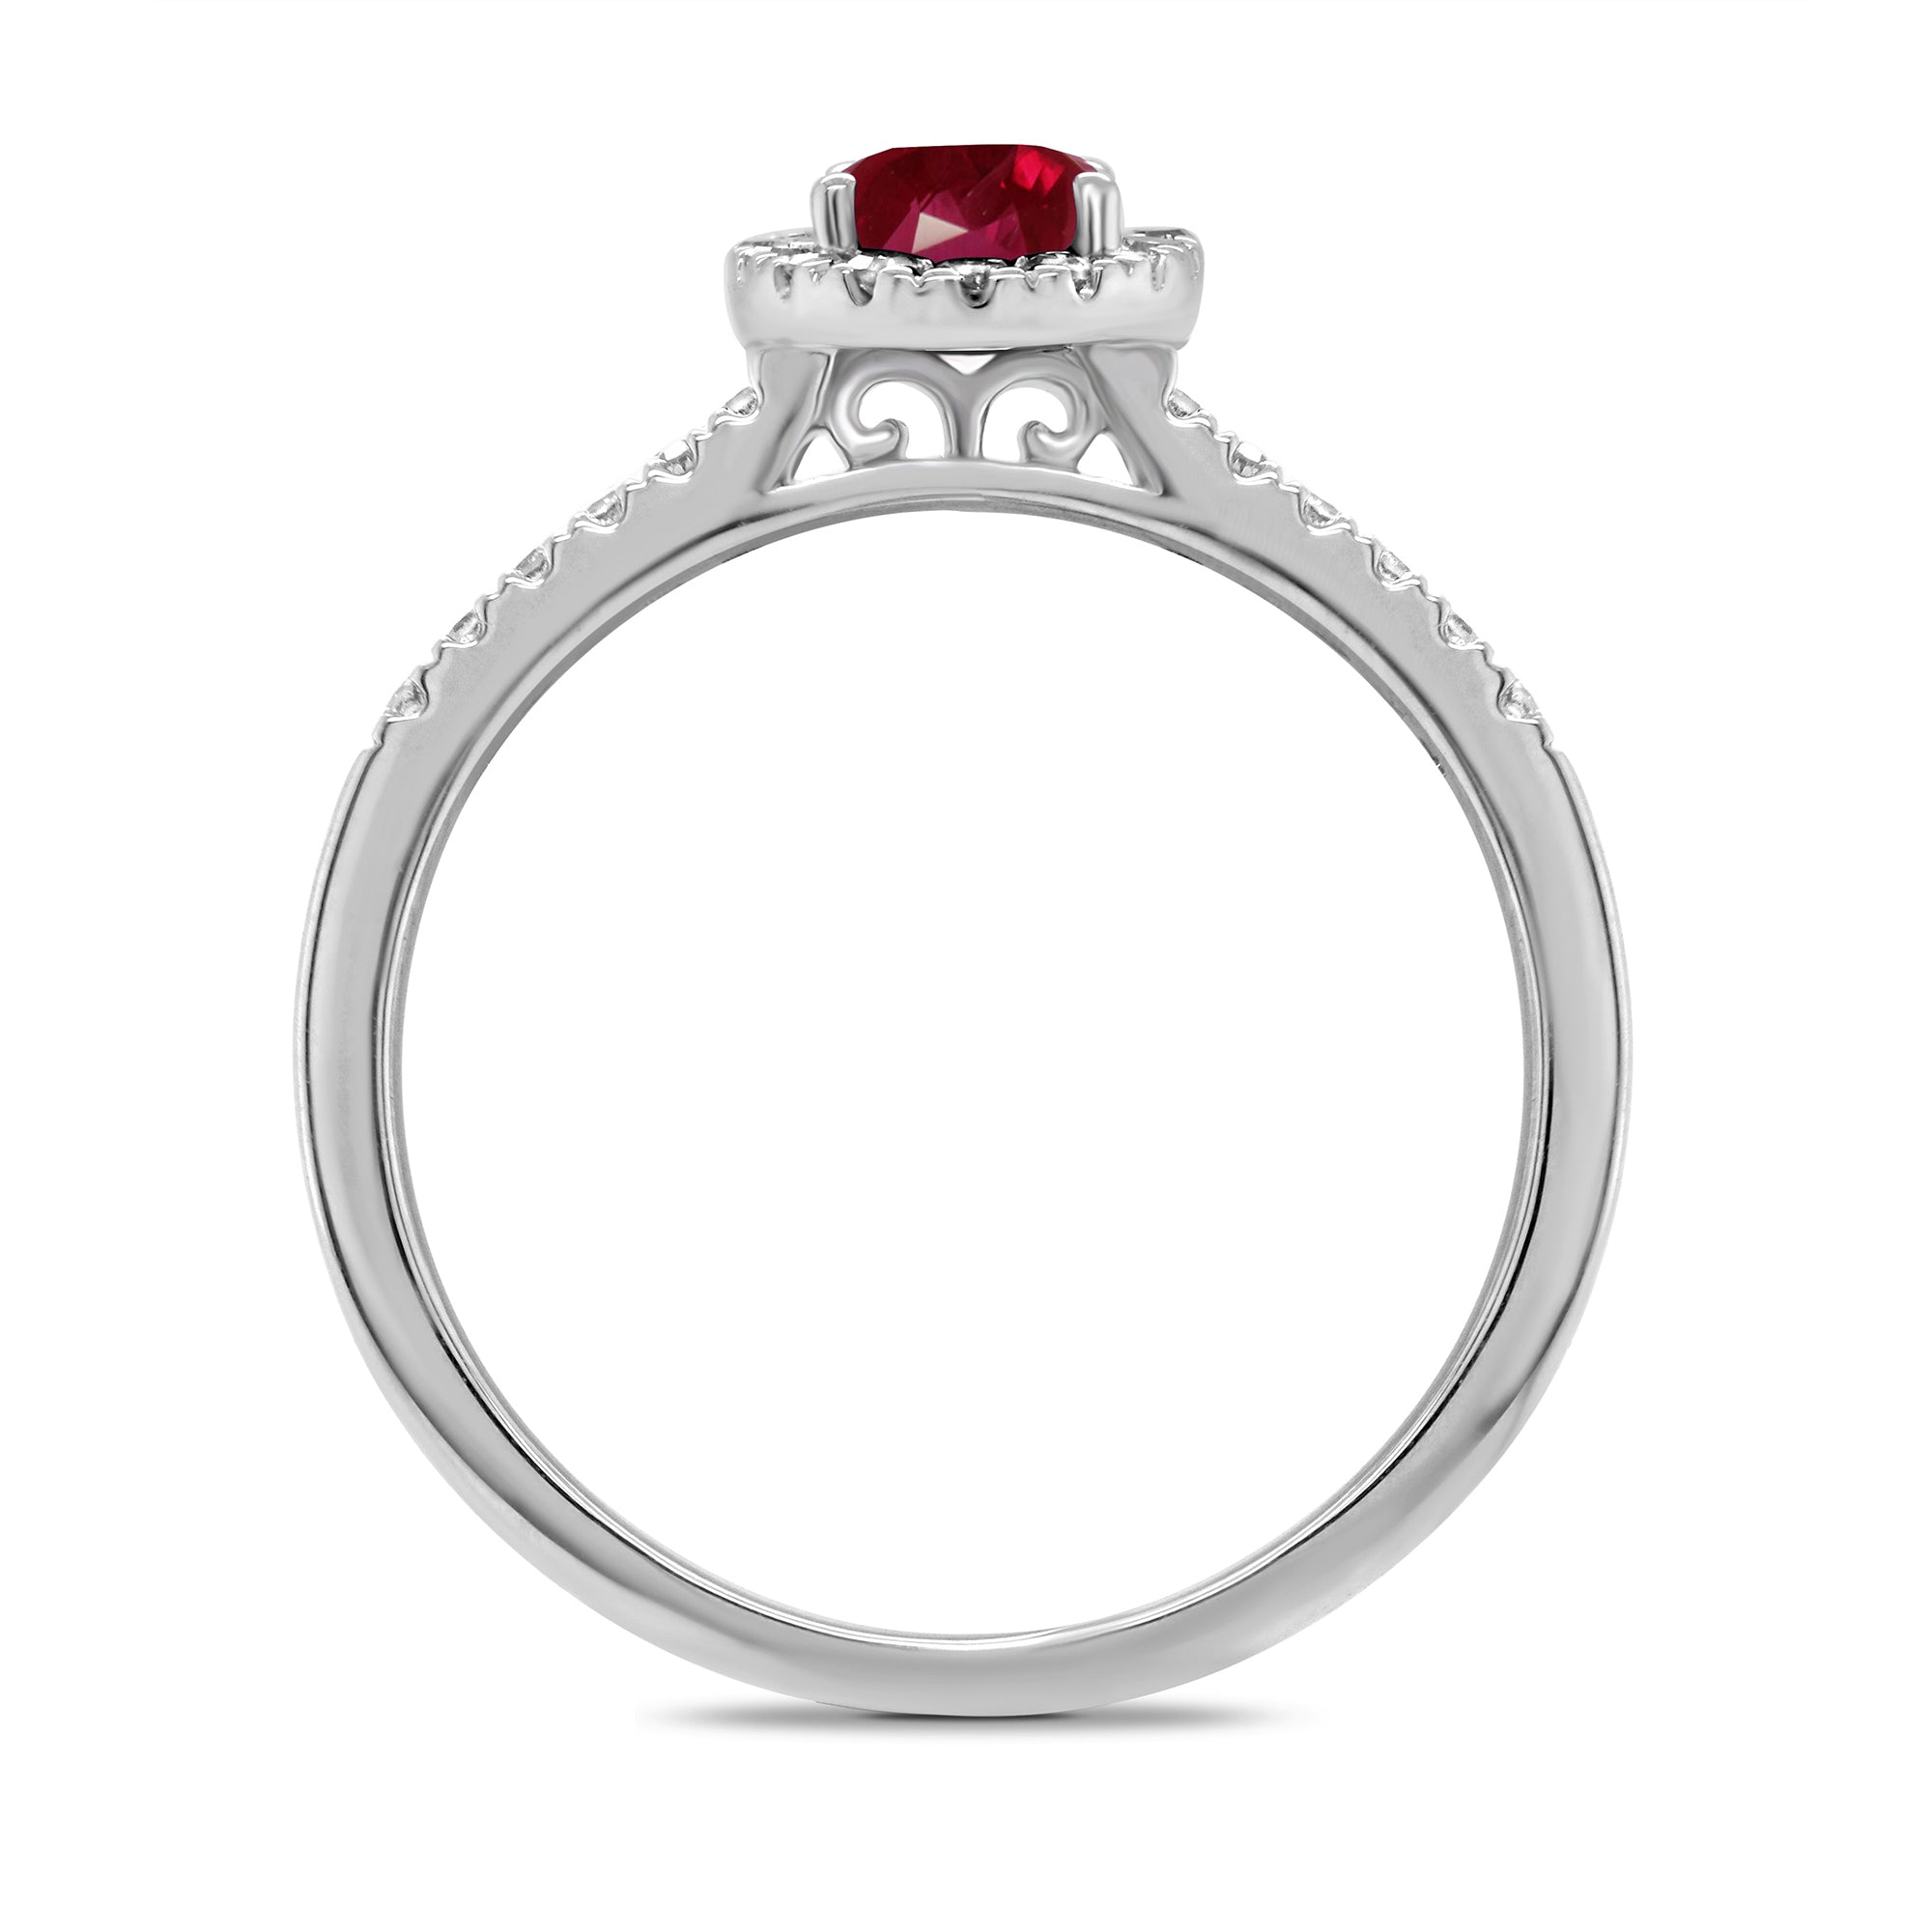 9ct white gold 6x4mm oval ruby & diamond cluster ring with diamond set shoulders 0.20ct